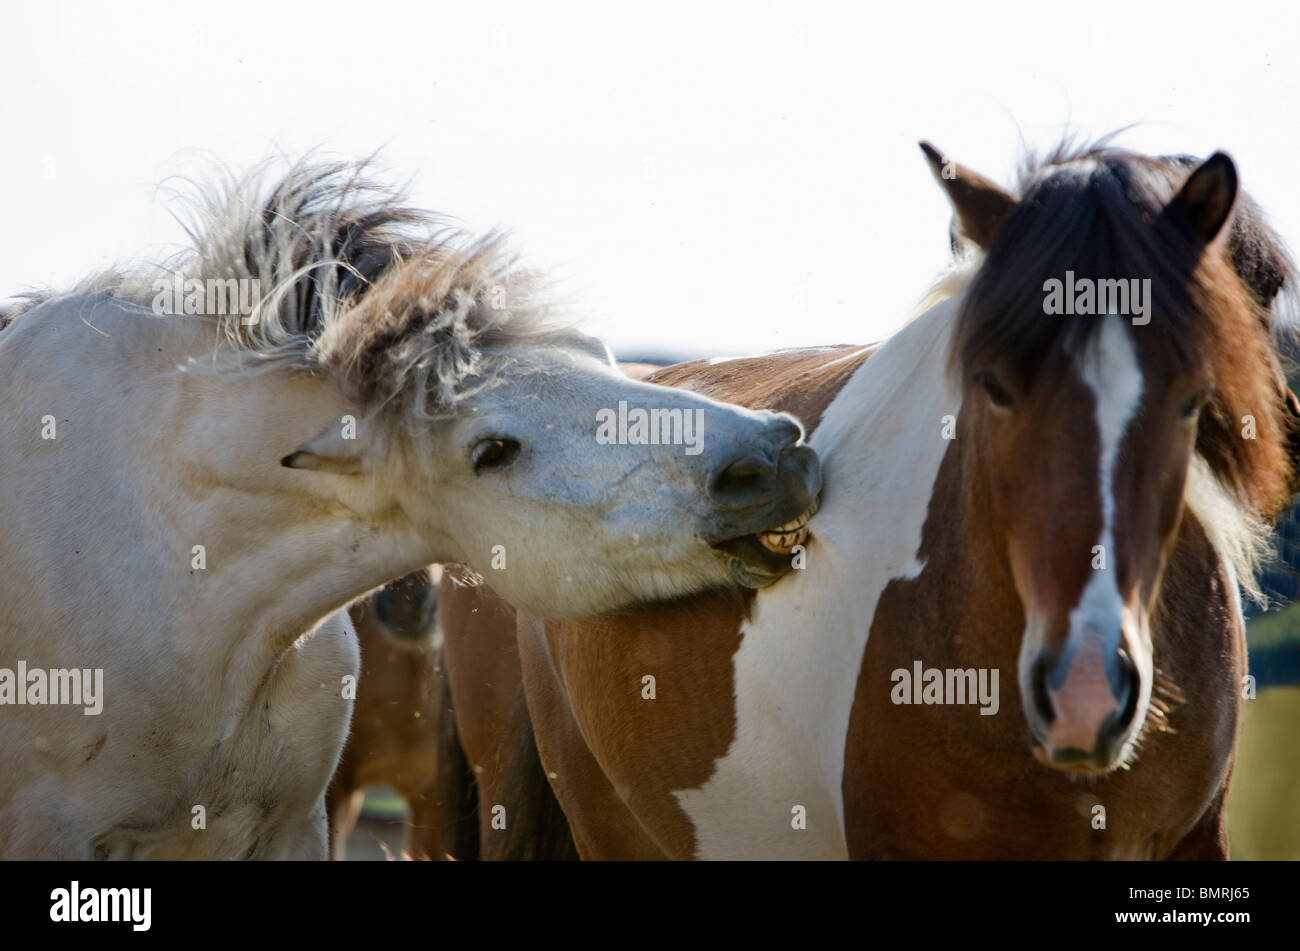 Horse riding in Southern Iceland. Fossness Farm. The leader of the loose horses using a bite to control the team. Stock Photo